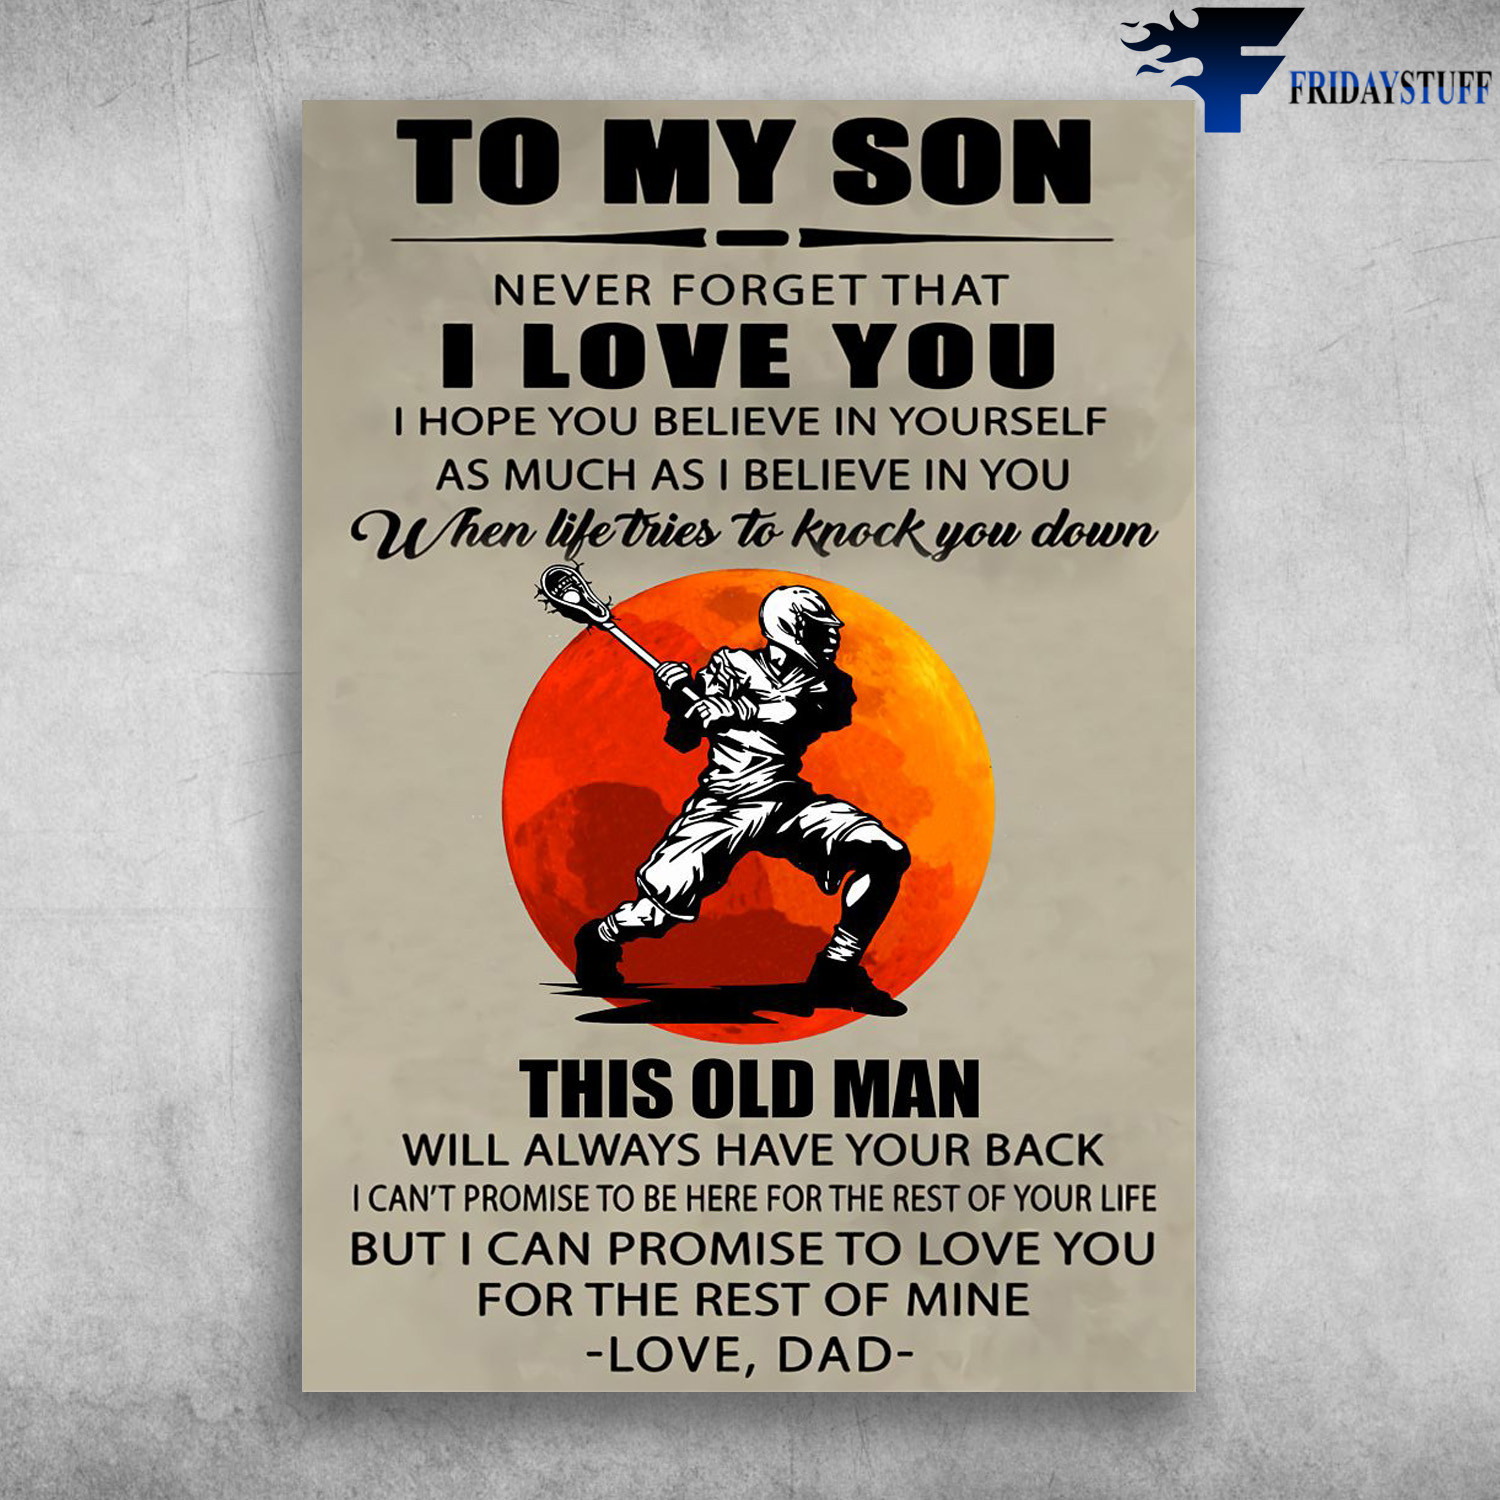 Lacrosse Player, Dad And Son - To My Son, Never Forget That, I Love You, I Hope You Believe In Yourself, As Much As I Believe In You, When Life Tries To Know You Down, This Old Man, Will Always Have You Back